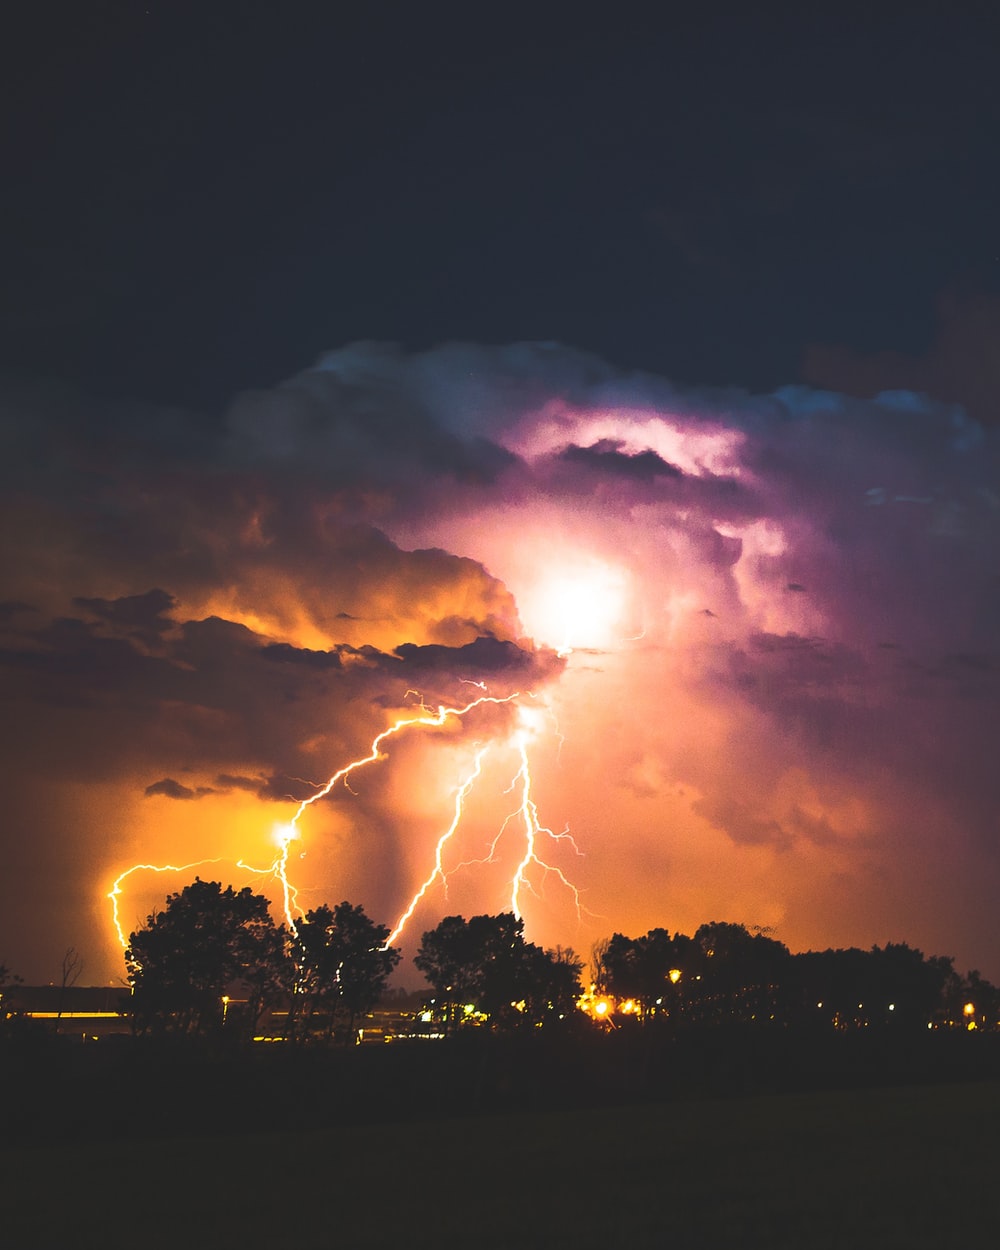 Thunder Cloud Picture. Download Free Image